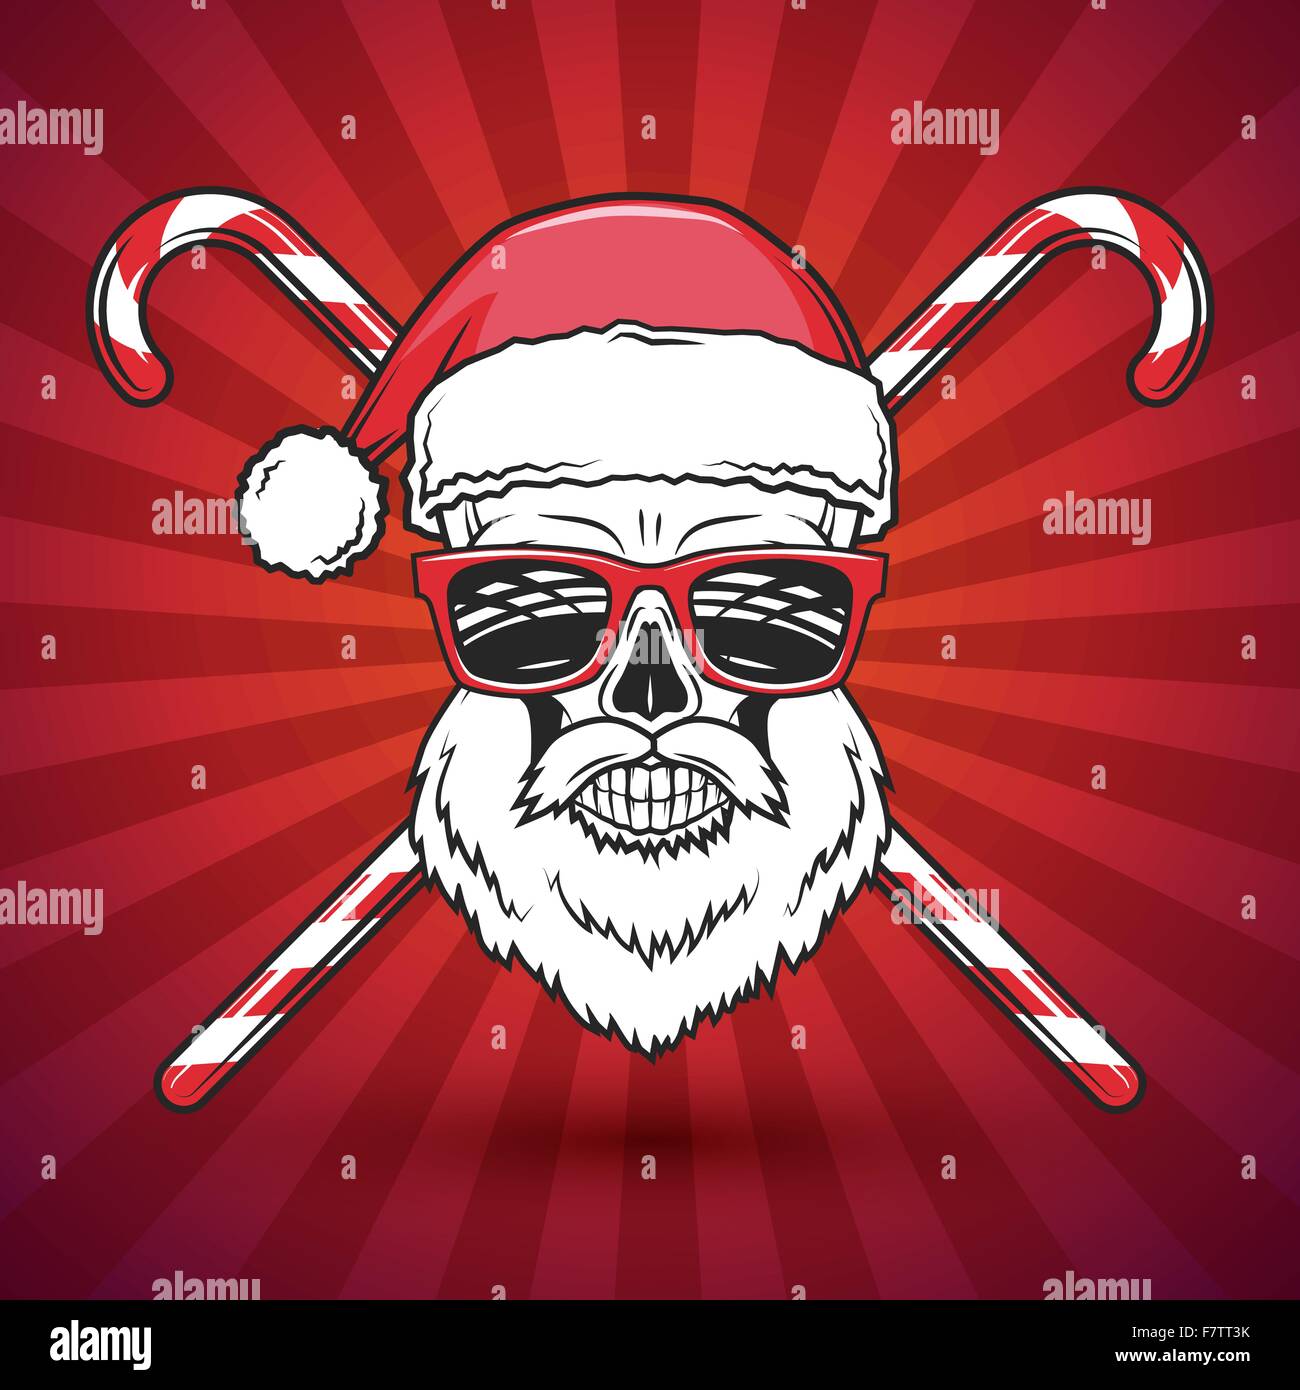 Bad Santa Claus biker with candy cones print design. Vintage Heavy metal Christmas portrait. Rock and roll new year t-shirt illustration. Stock Vector